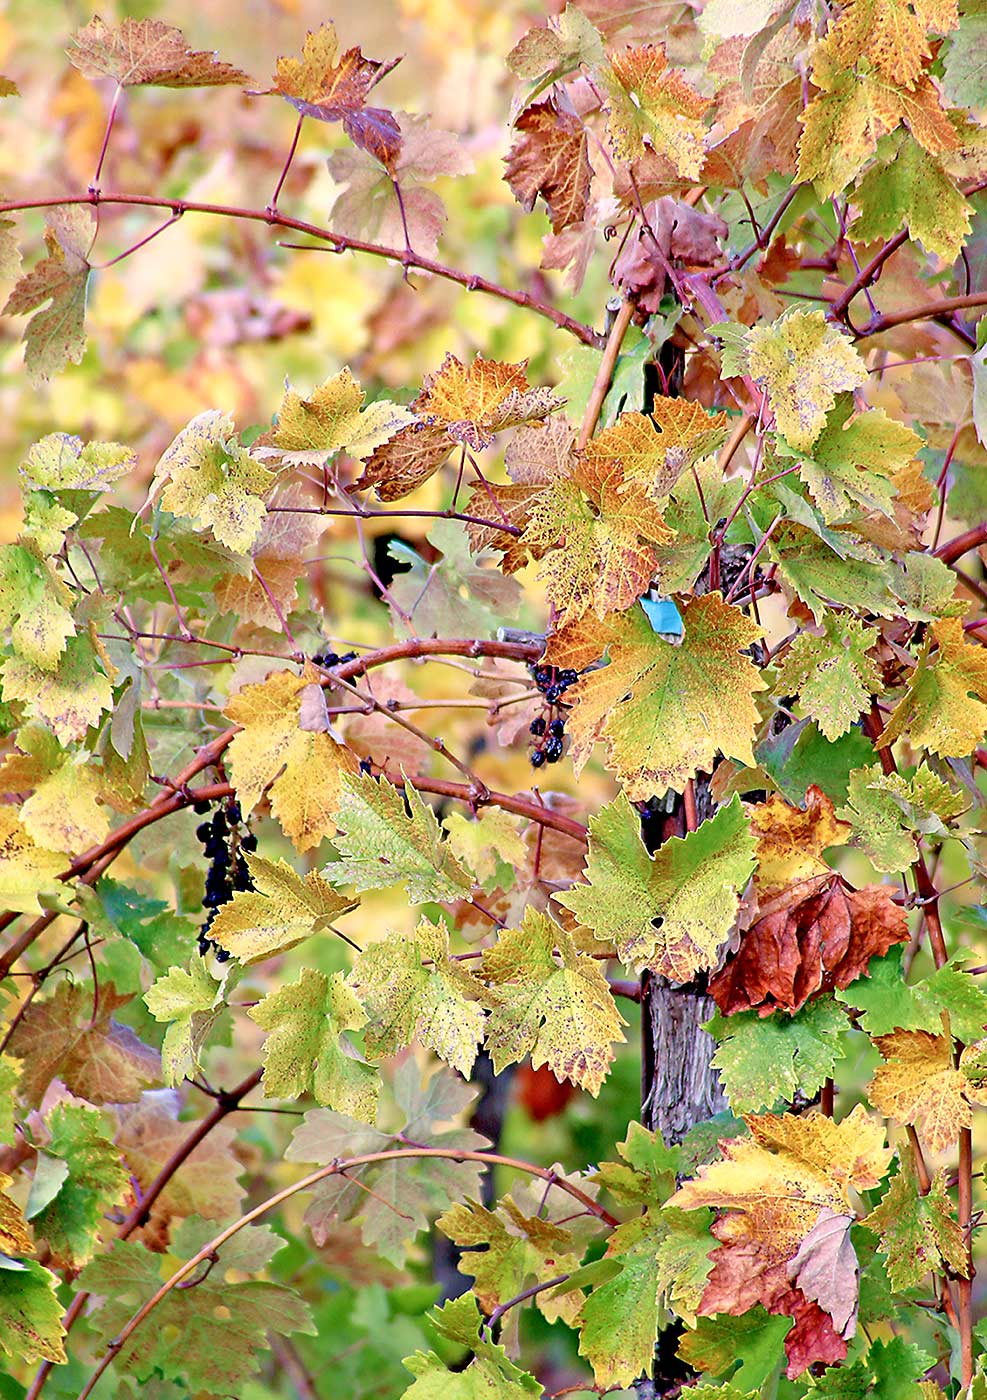 Grapevine red blotch virus, as seen here in a Zinfandel orchard in Northern California, reduces fruit quality by disrupting photosynthesis, according to a recent study by University of California, Davis, scientists. The fruit acquire less sugar and don’t produce enough of the desired anthocyanins, said viticulture extension specialist Kaan Kurtural. (Photo courtesy Event Kilmartin, the University of California)